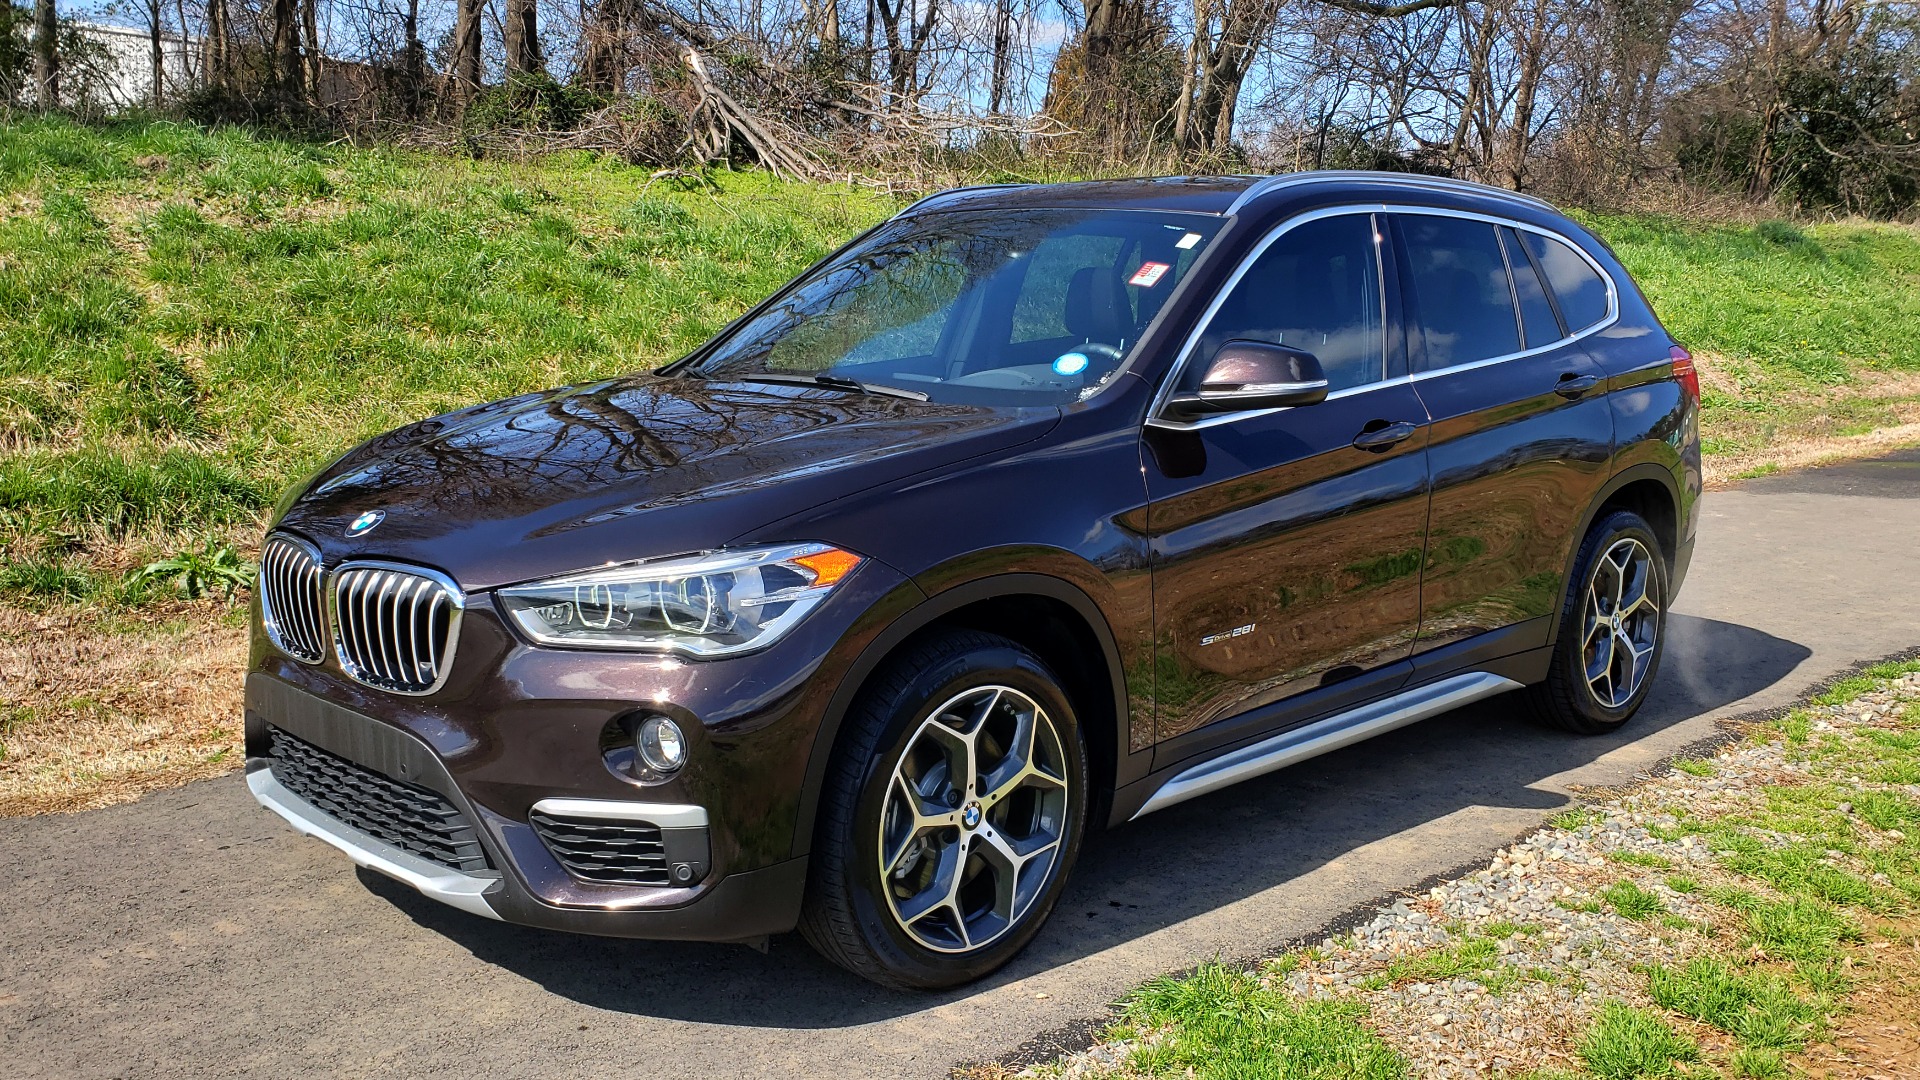 Used 2017 BMW X1 SDRIVE28I PREMIUM / DRVR ASST / PANO-ROOF / REARVIEW for sale Sold at Formula Imports in Charlotte NC 28227 1